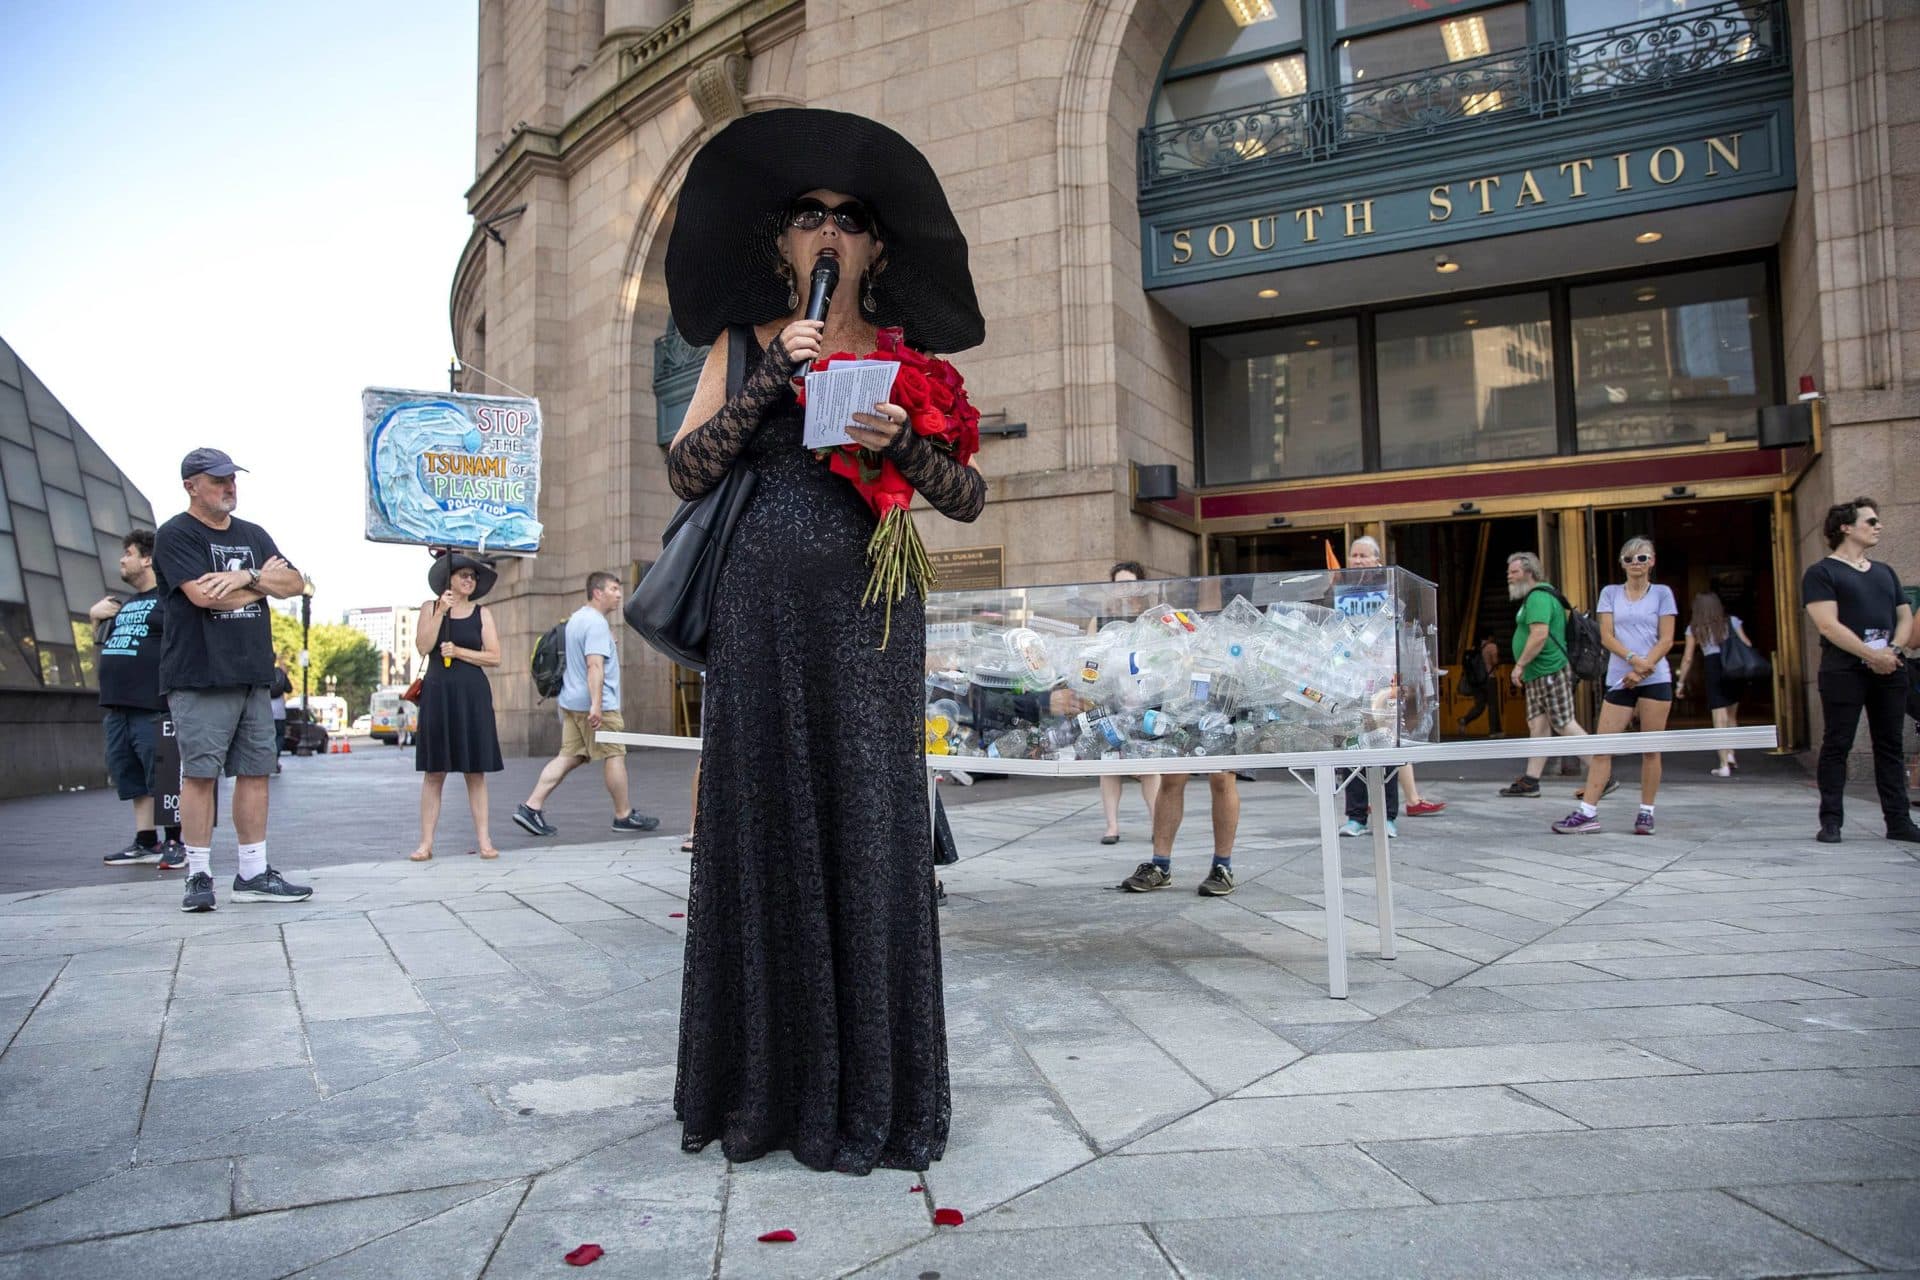 Artist Anne-Katrin Spiess reads a eulogy at a performance of &quot;Death by Plastic&quot; at the entrance of South Station. (Robin Lubbock/WBUR)